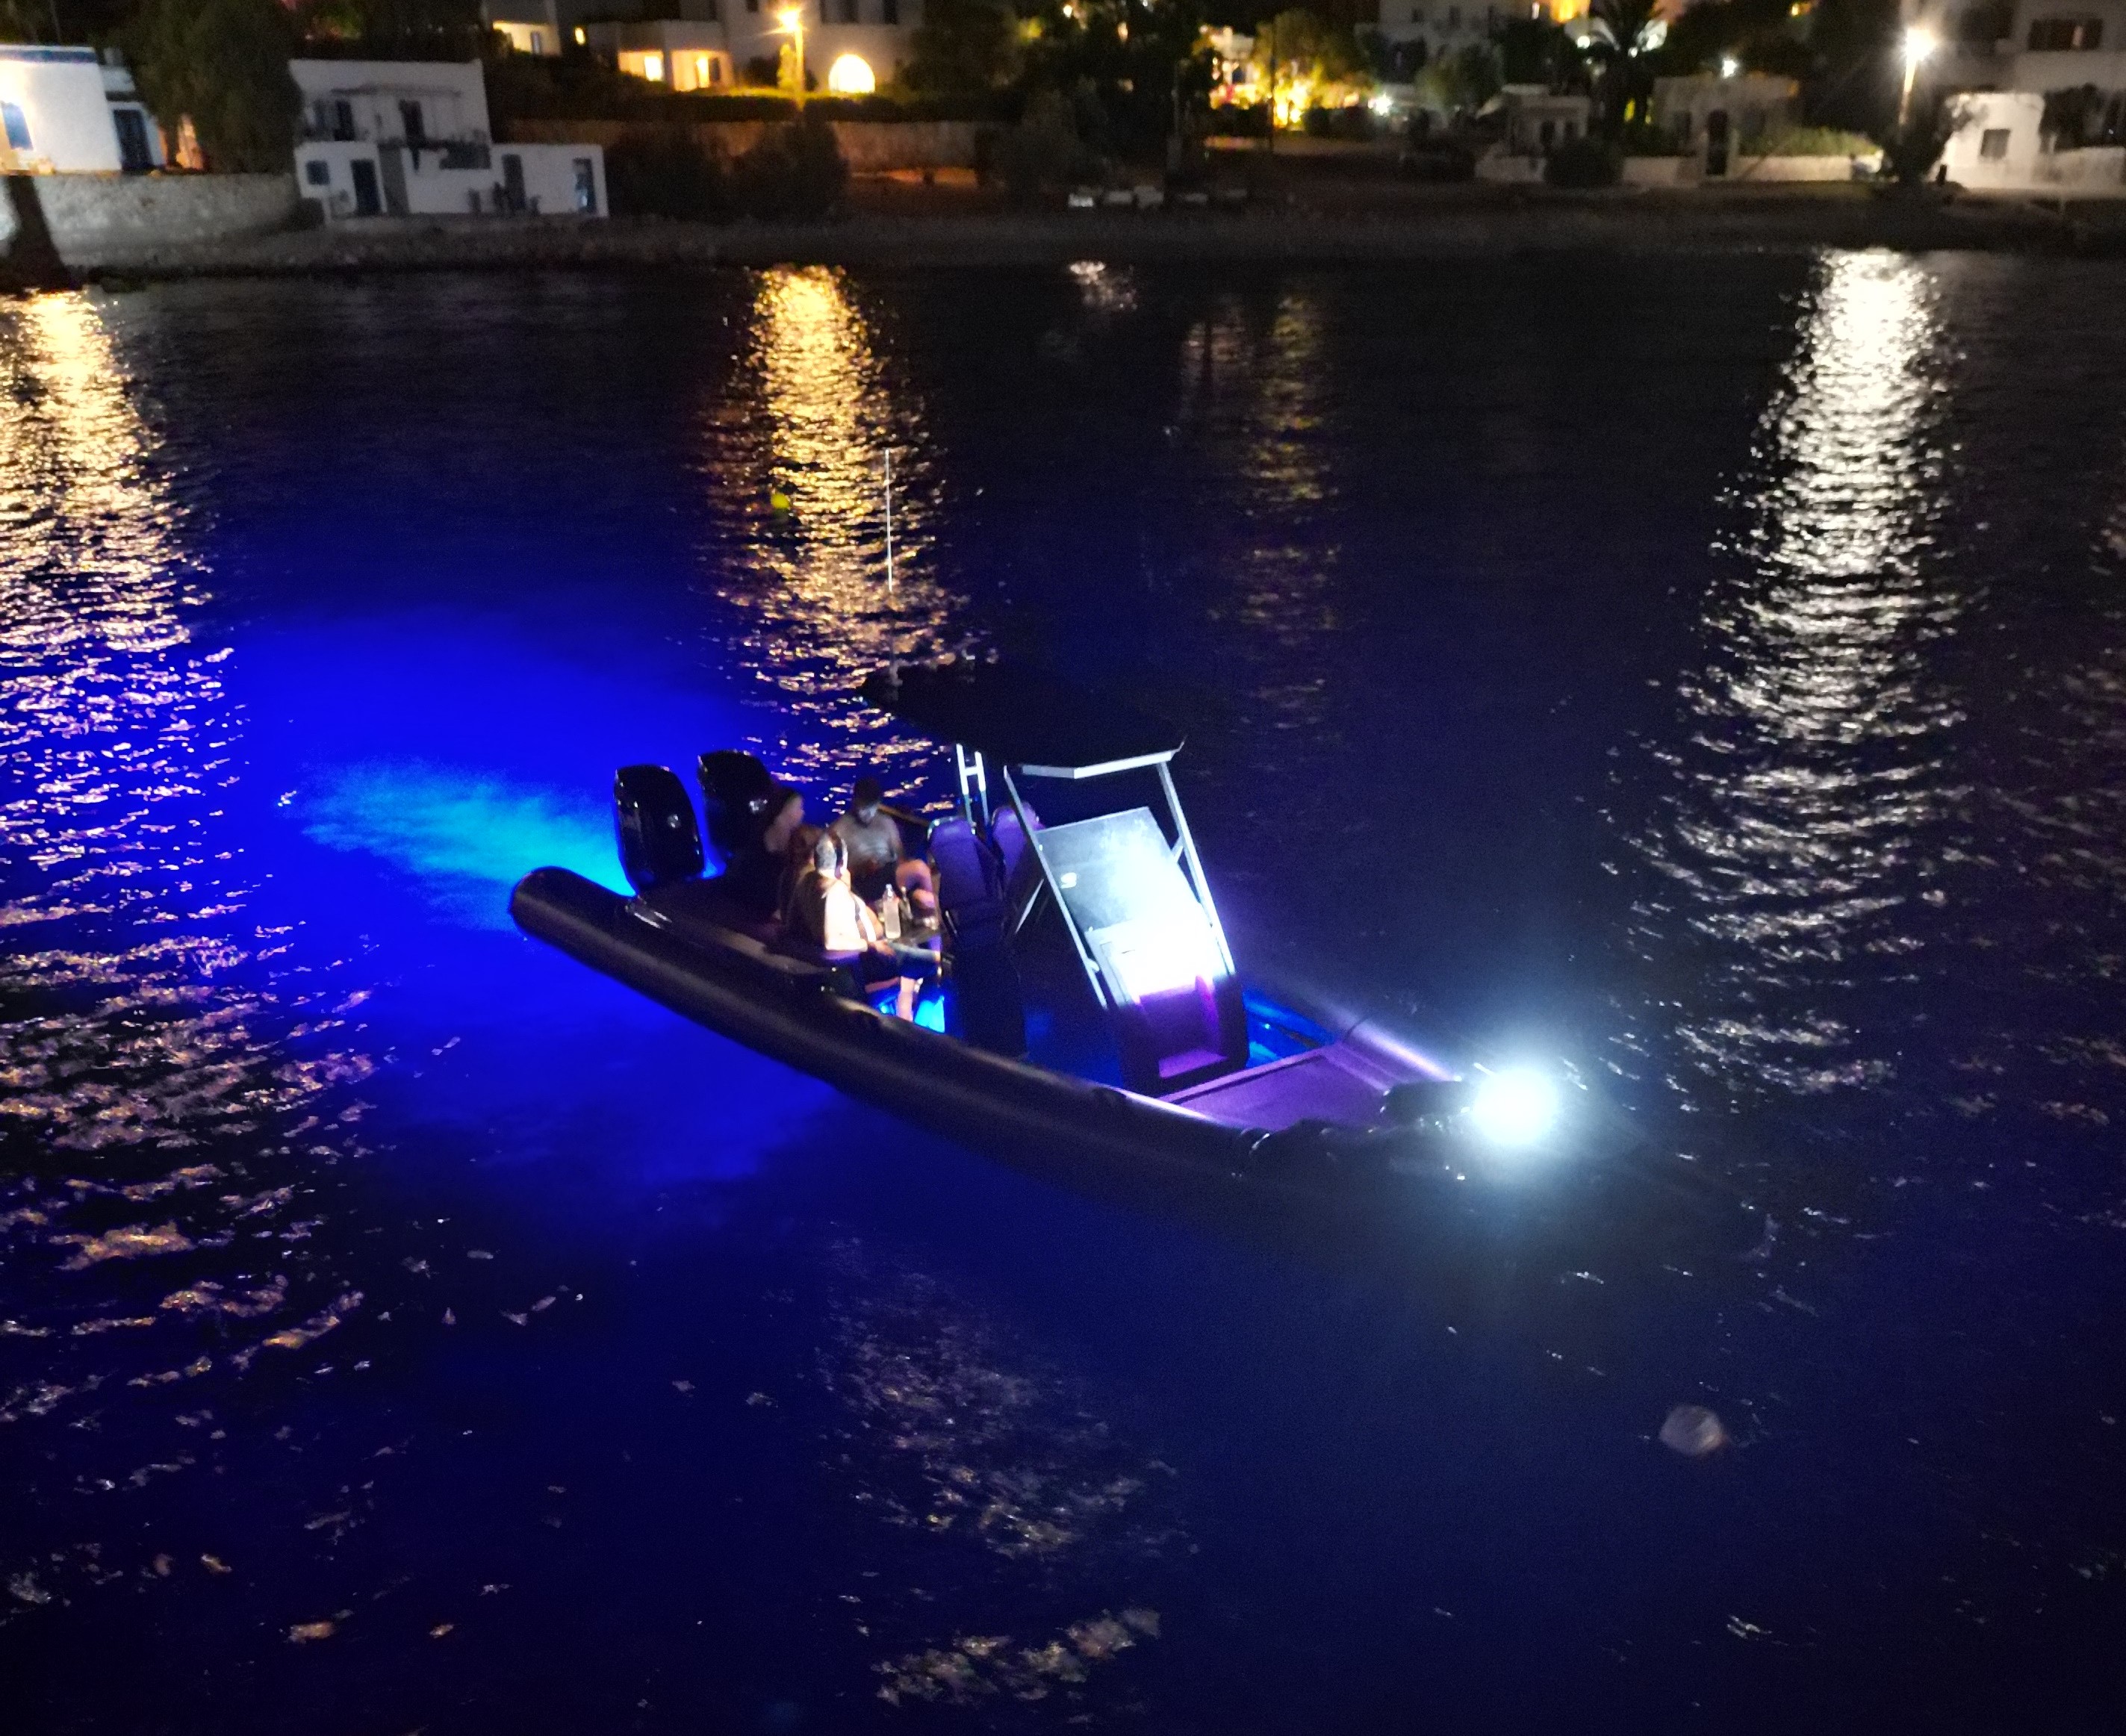 Nephele boat by night with lights on